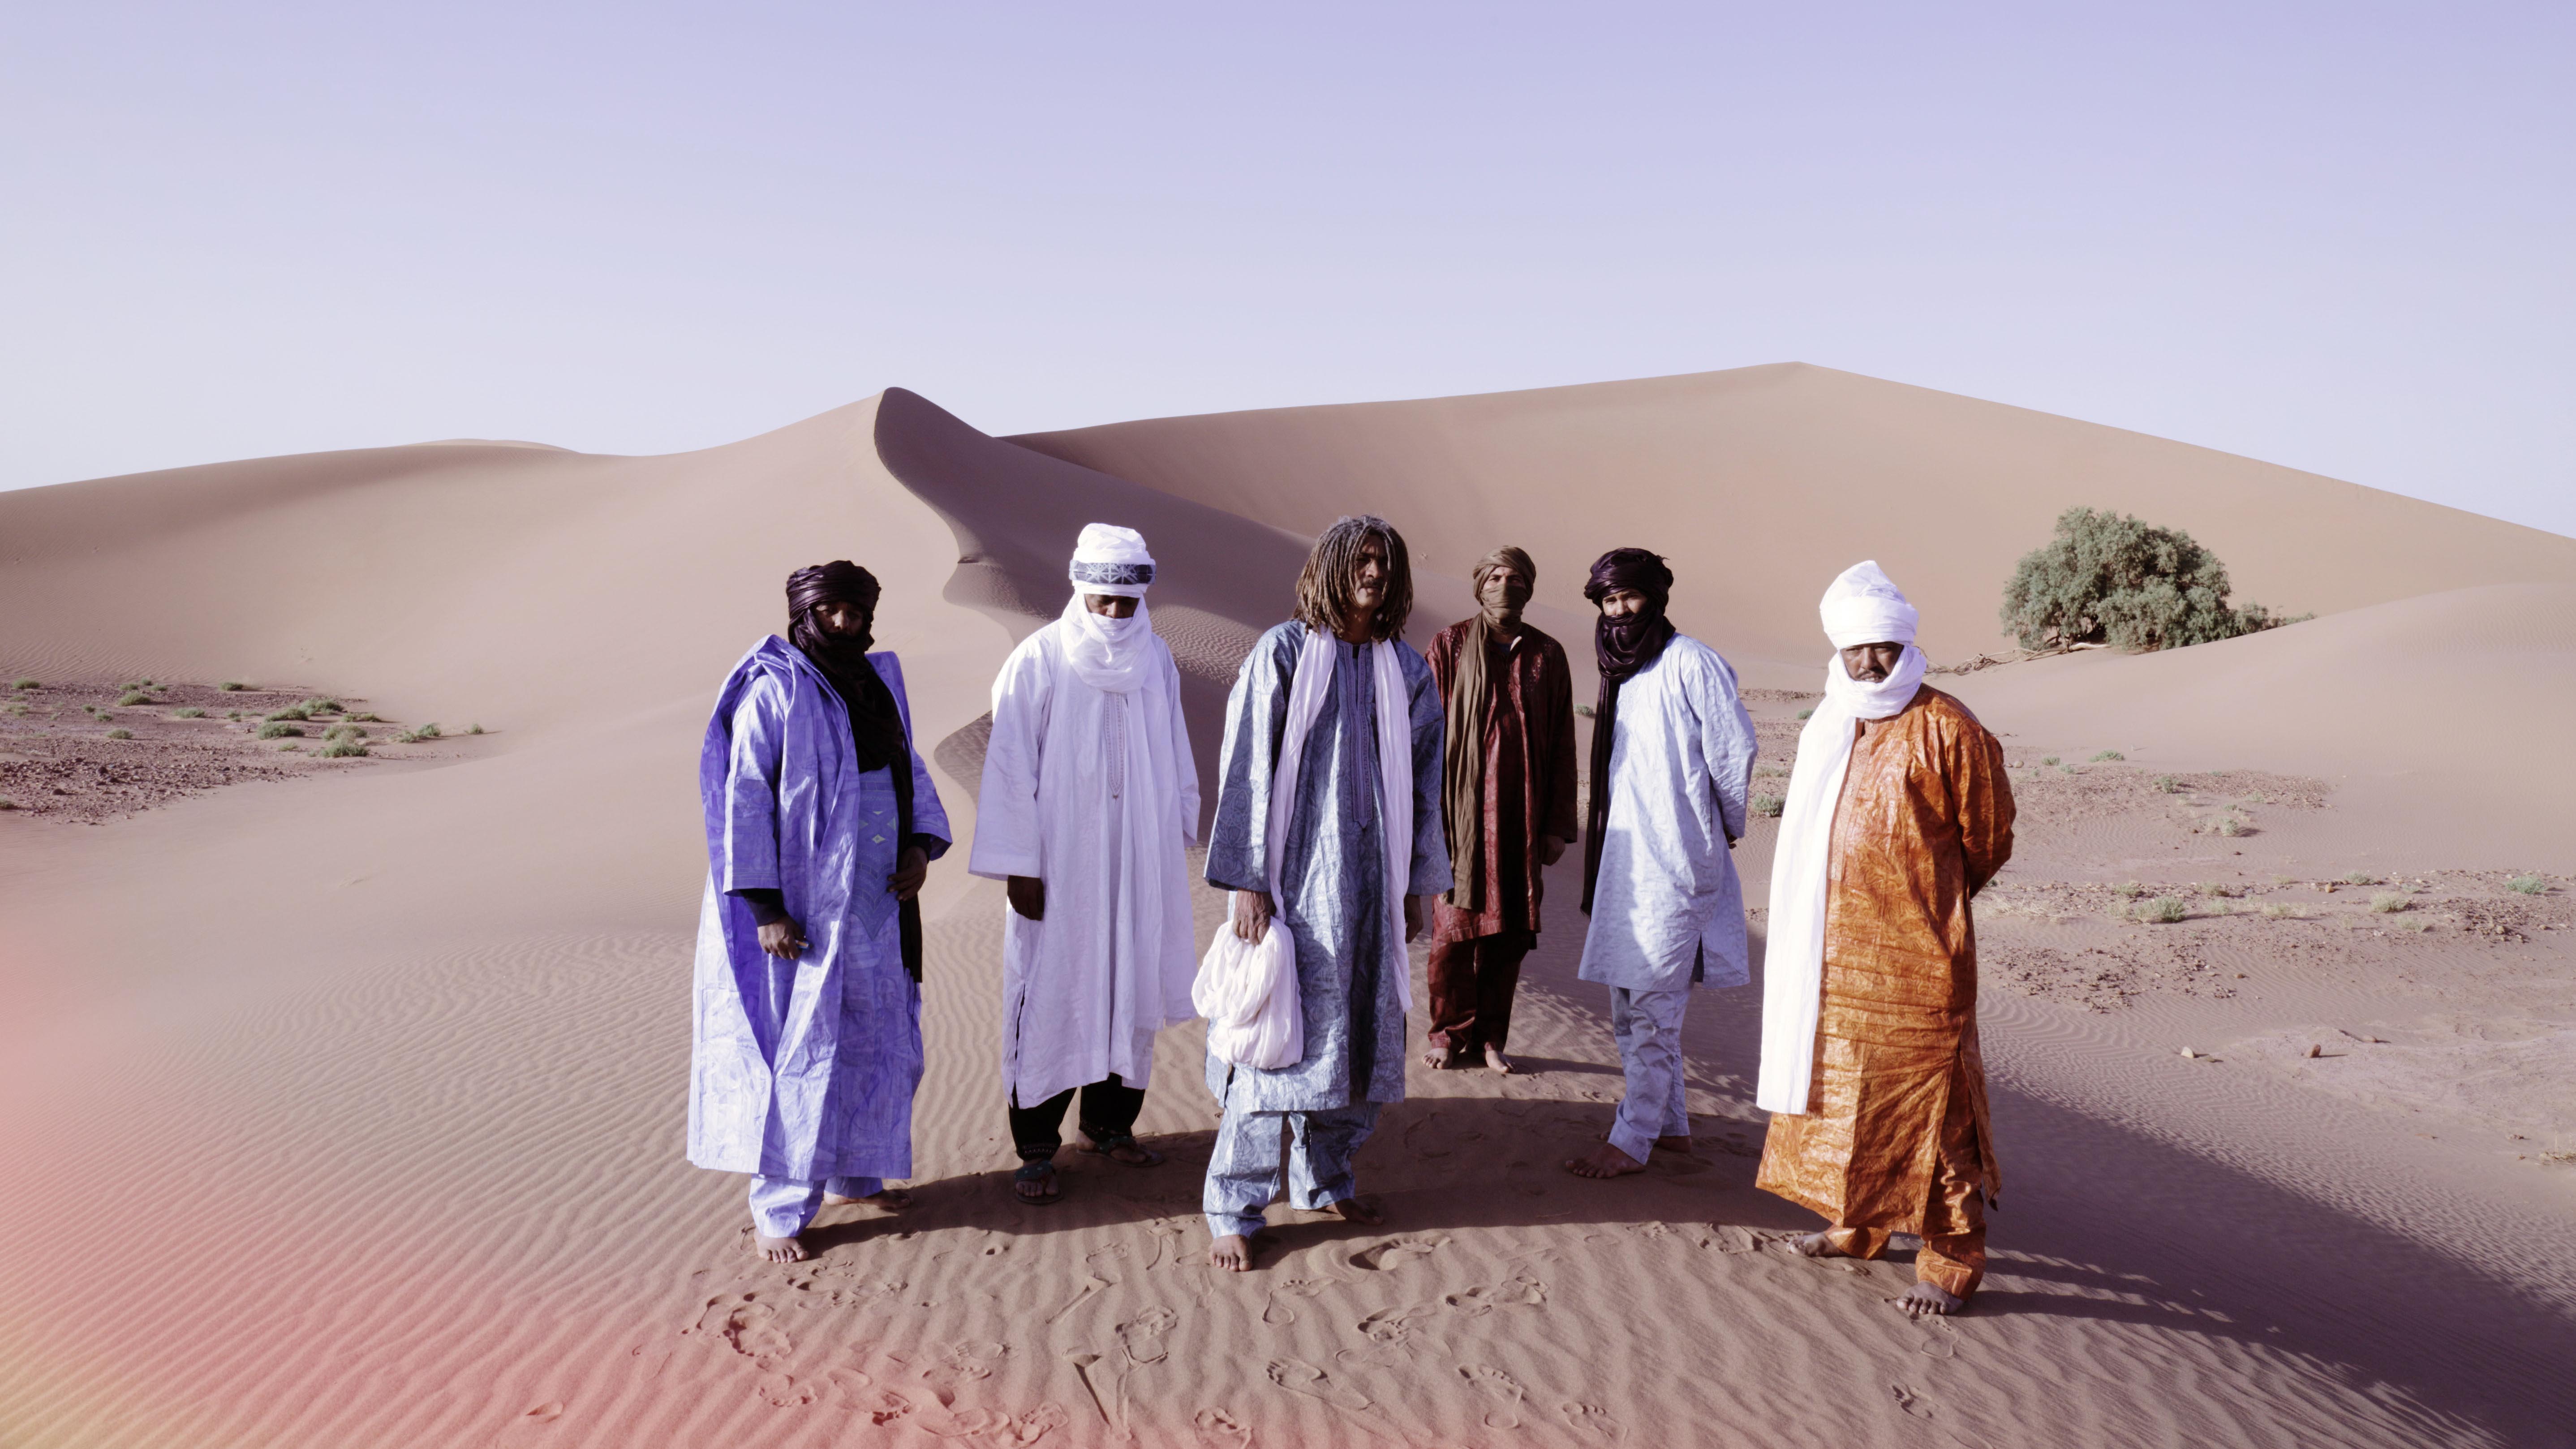 FLOOD: Tinariwen Sing Songs of Freedom for the Women of the Sahara in “Assàwt”